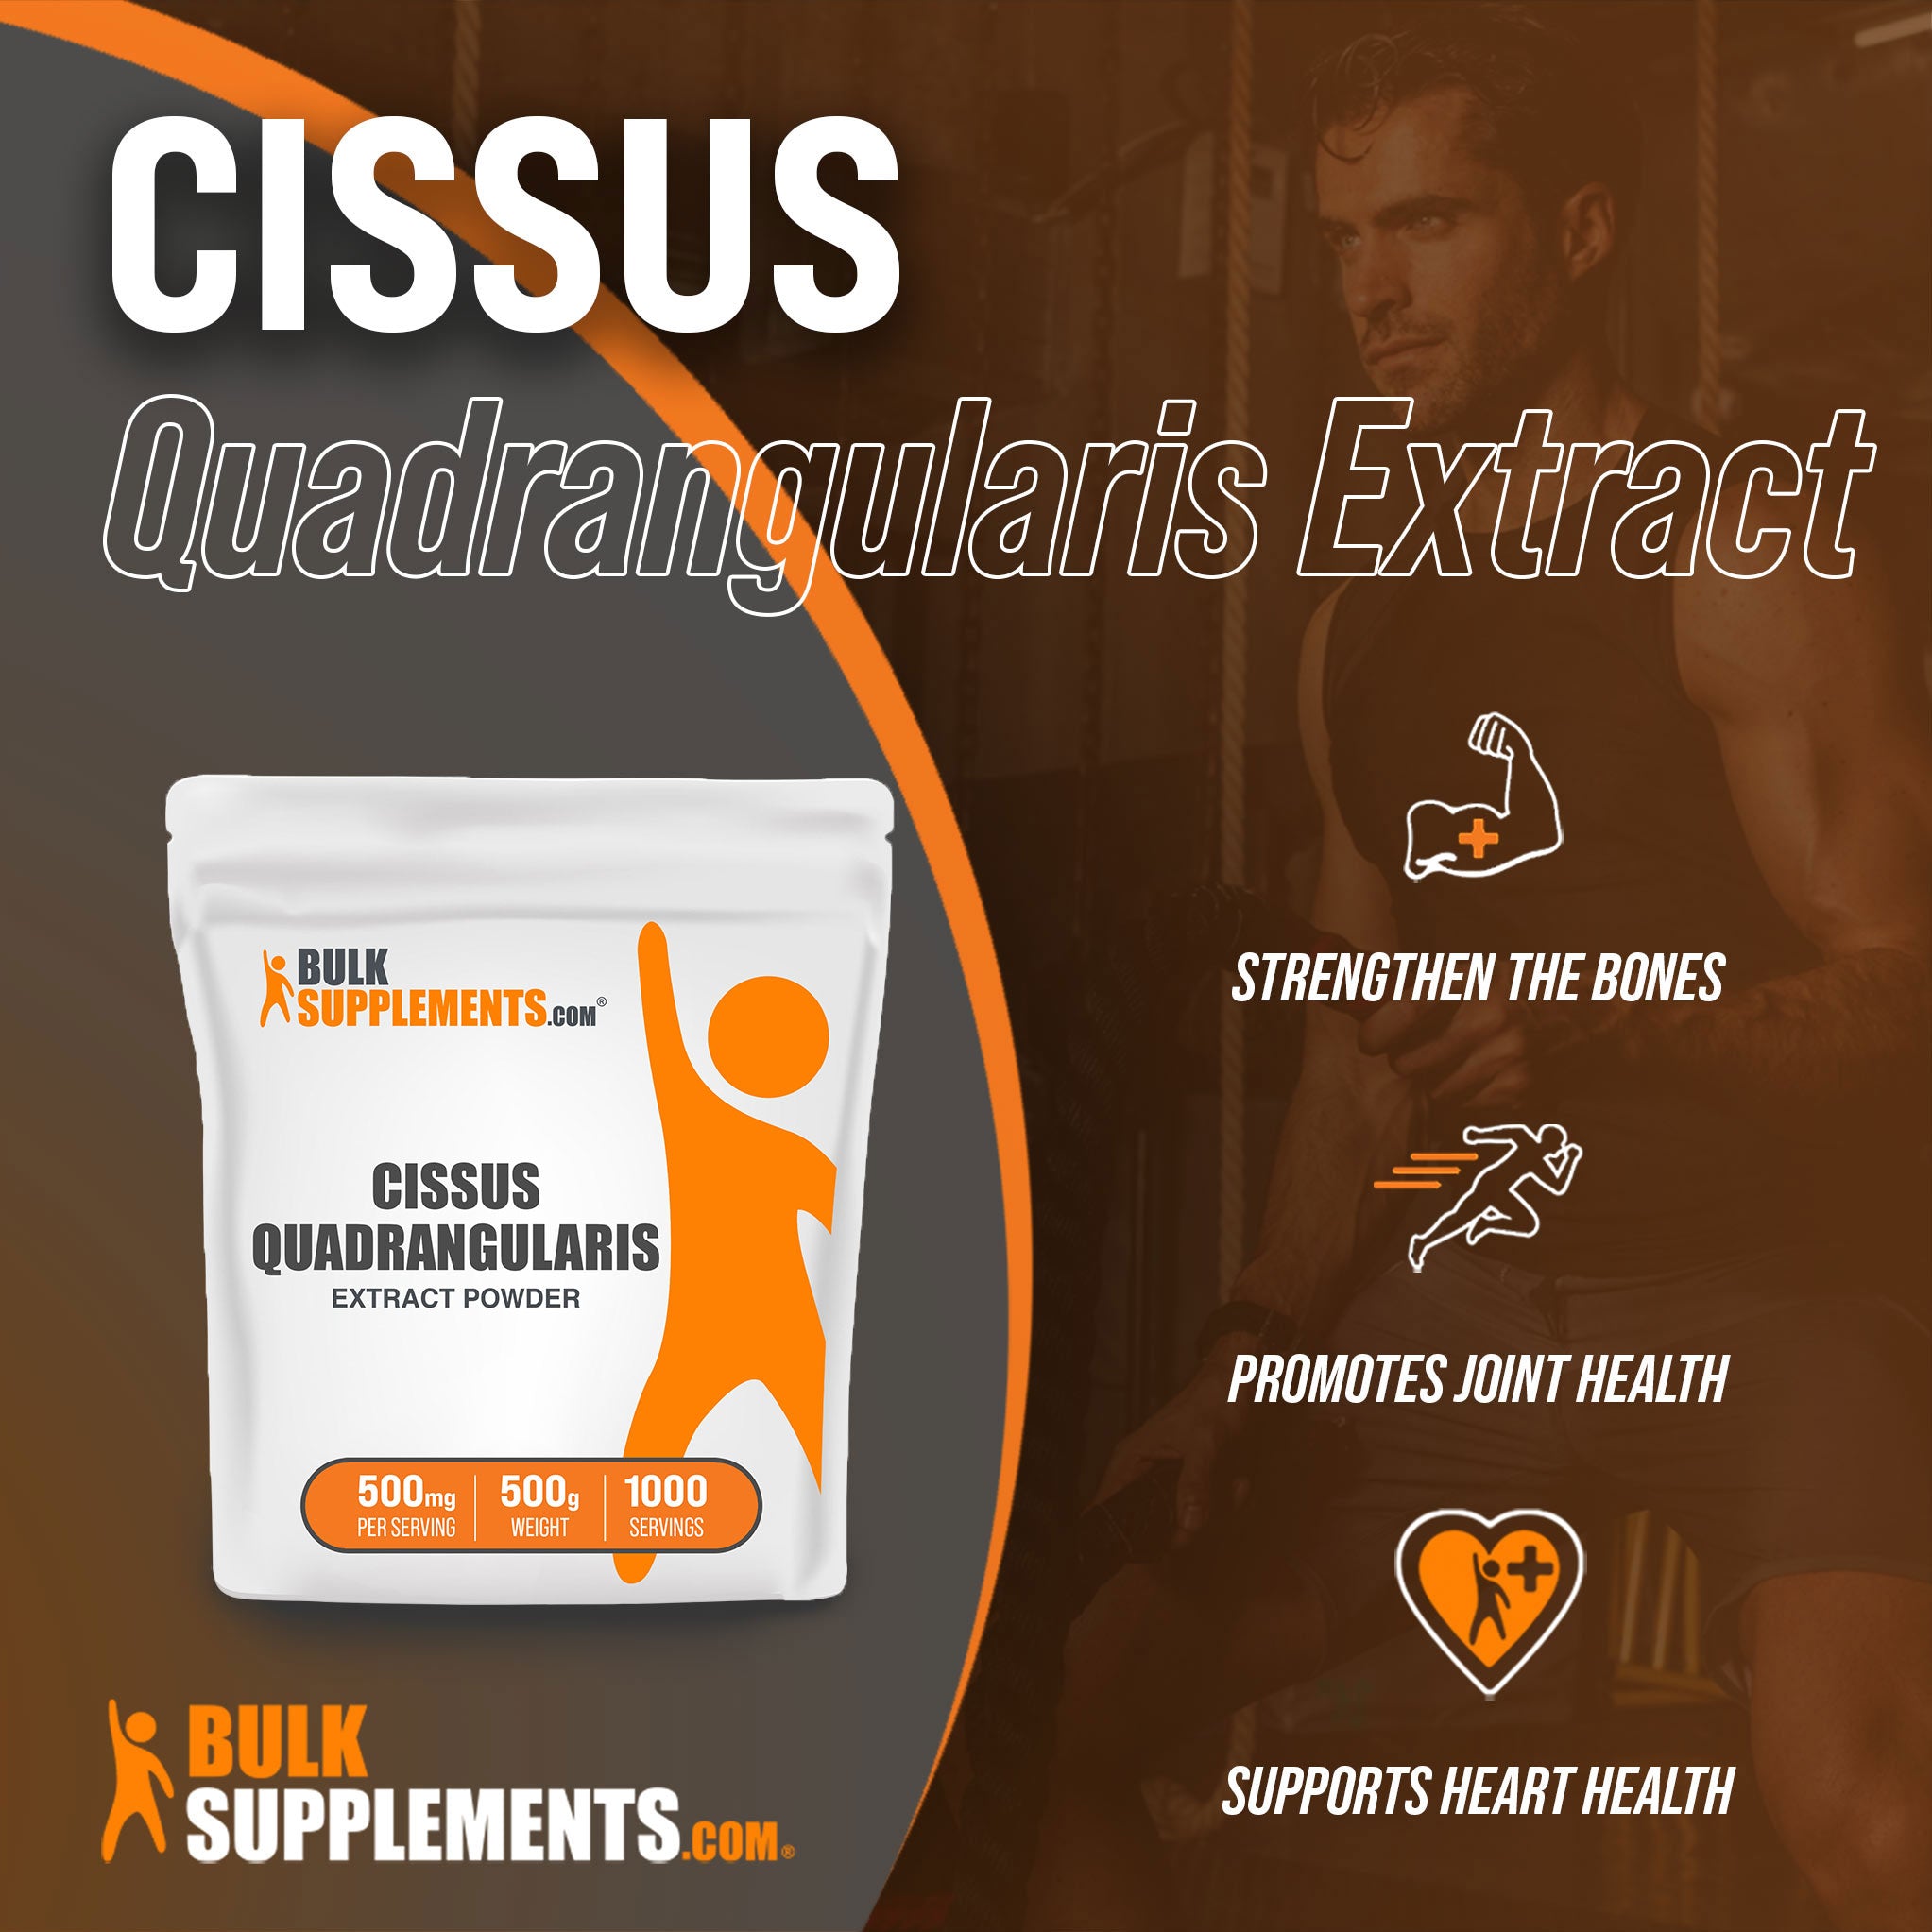 Benefits of Cissus Quadrangularis Extract; strengthen the bones, promotes joint health, supports heart health